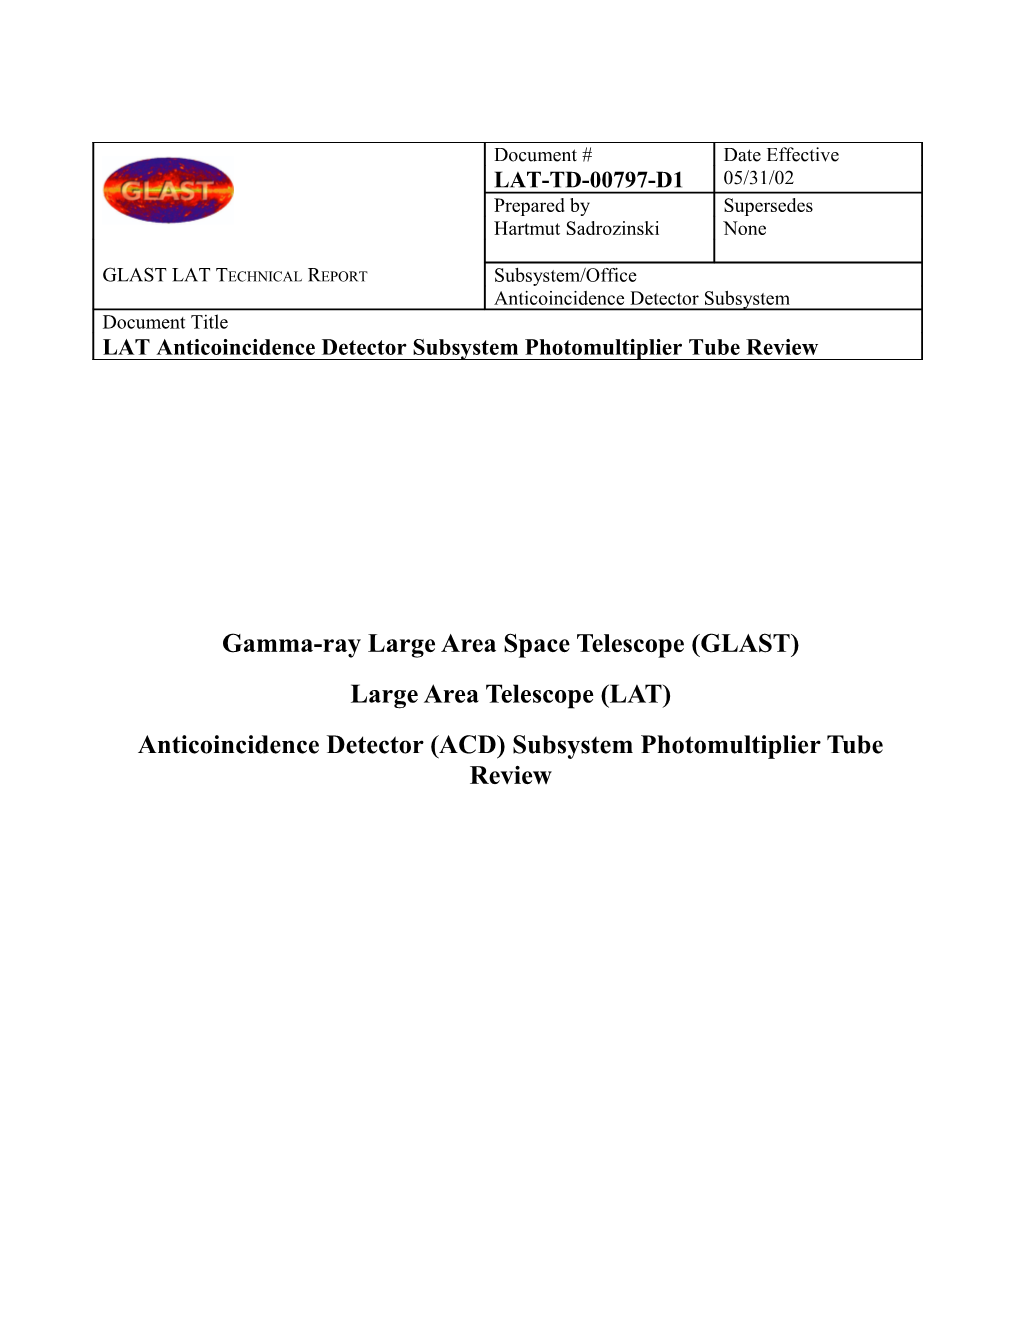 Review of GLAST/LAT ACD PMT Specifications